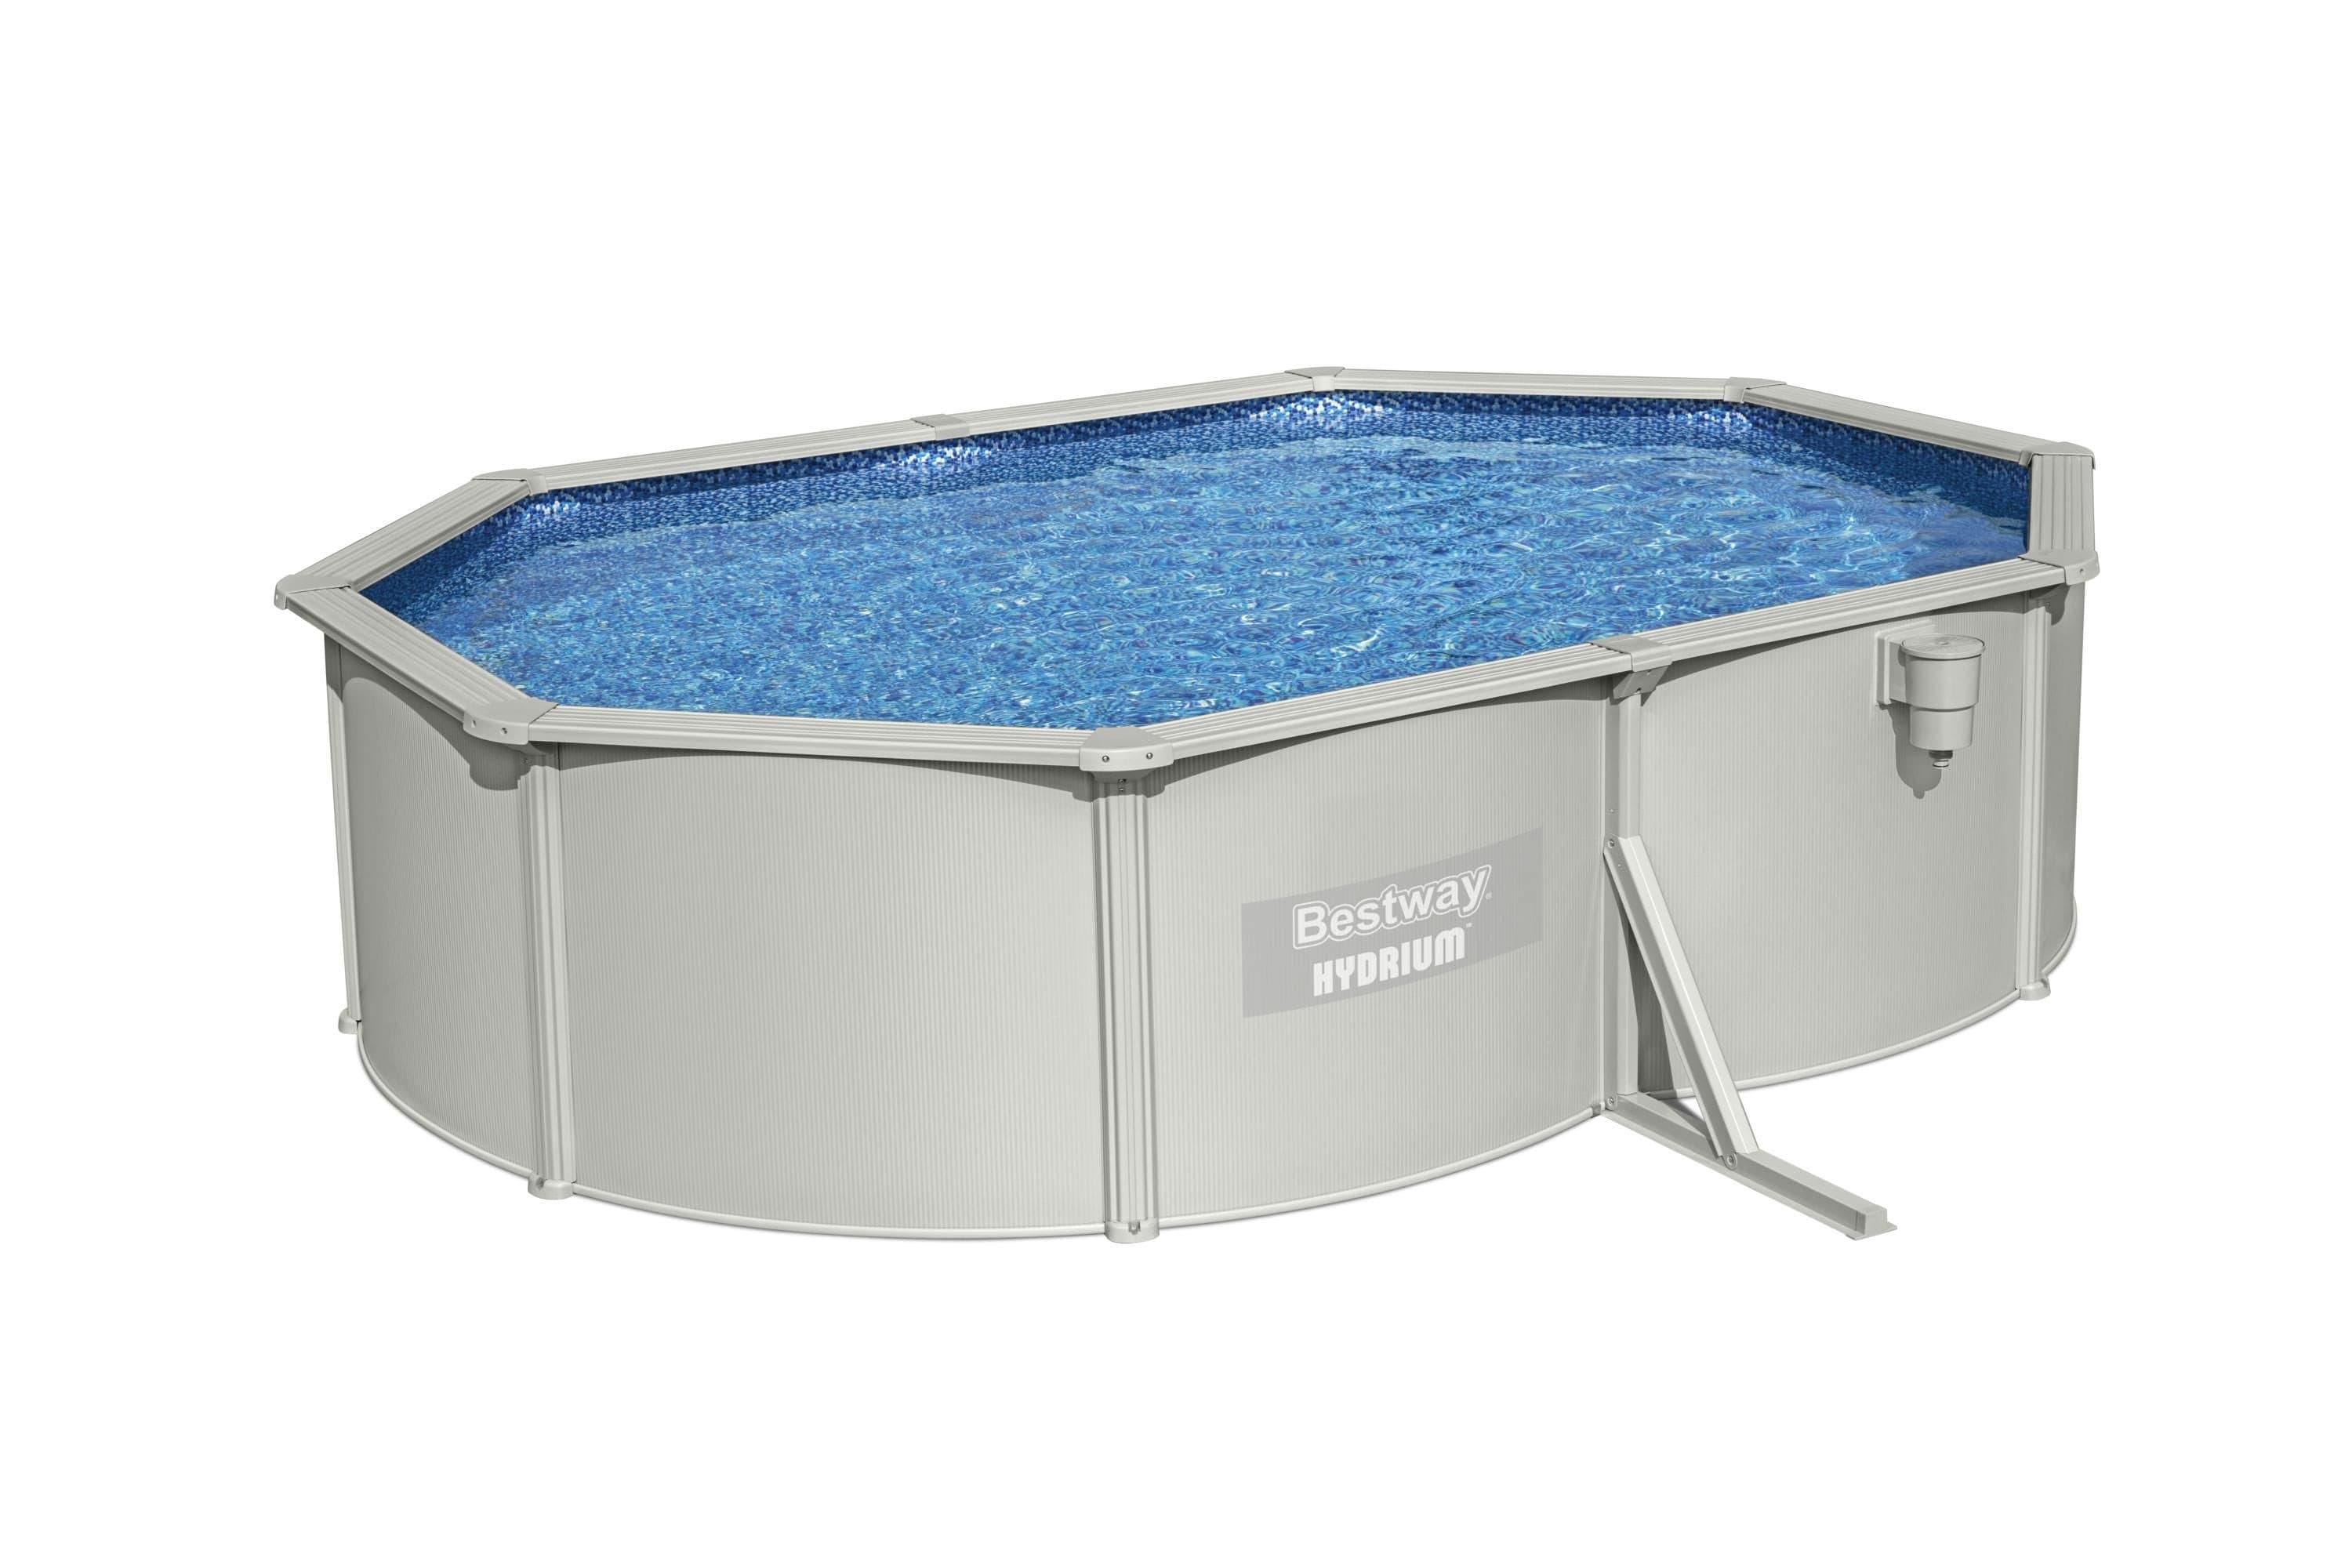 OVAL HYDRIUM POOL 5.00m X 3.60m X 1.20m With sand filter, cover and base mat